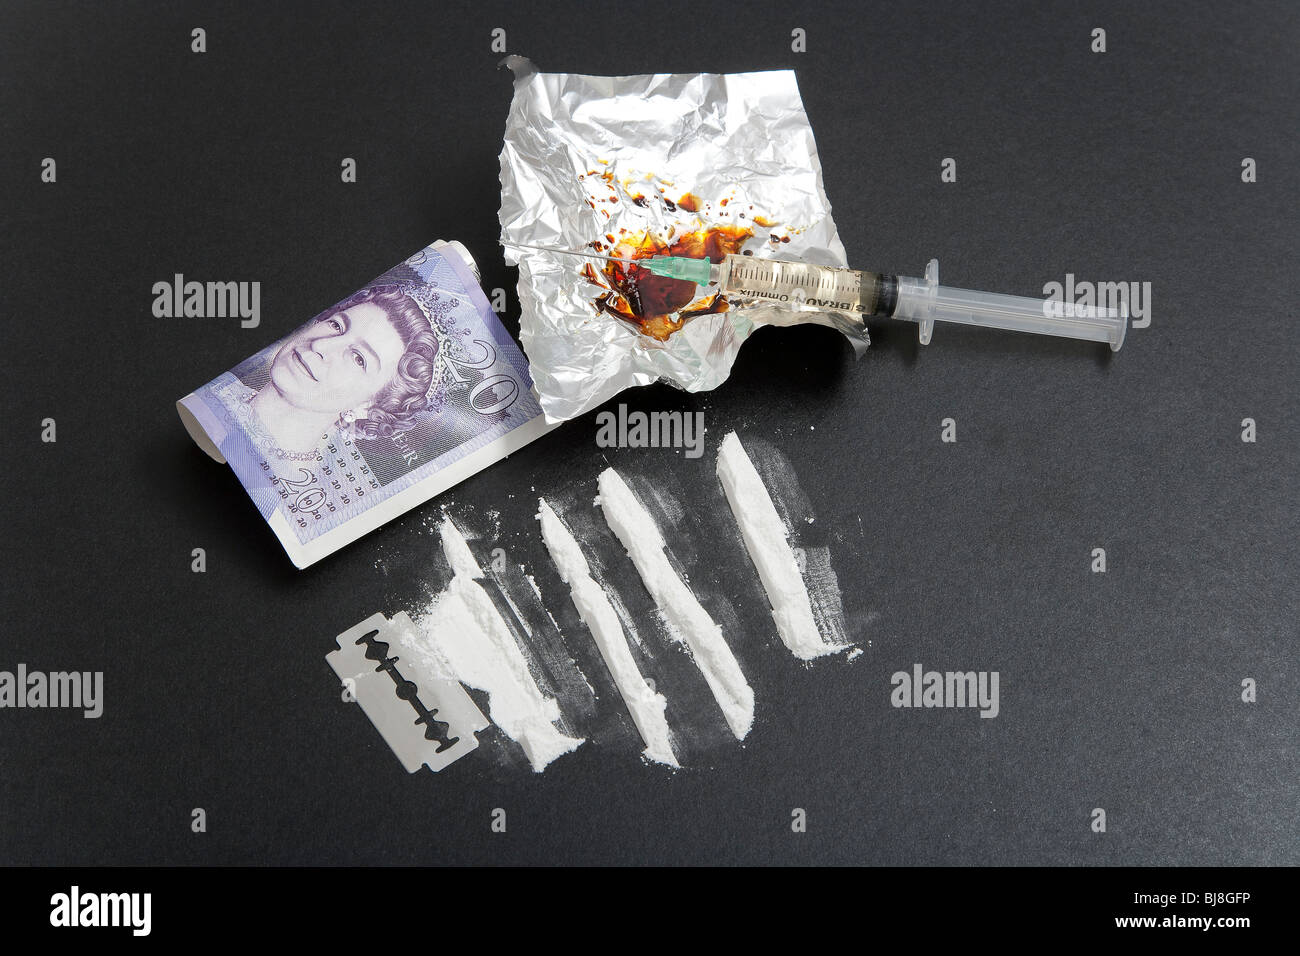 Drug paraphernalia_equipment_products or materials and  illegal drugs Stock Photo